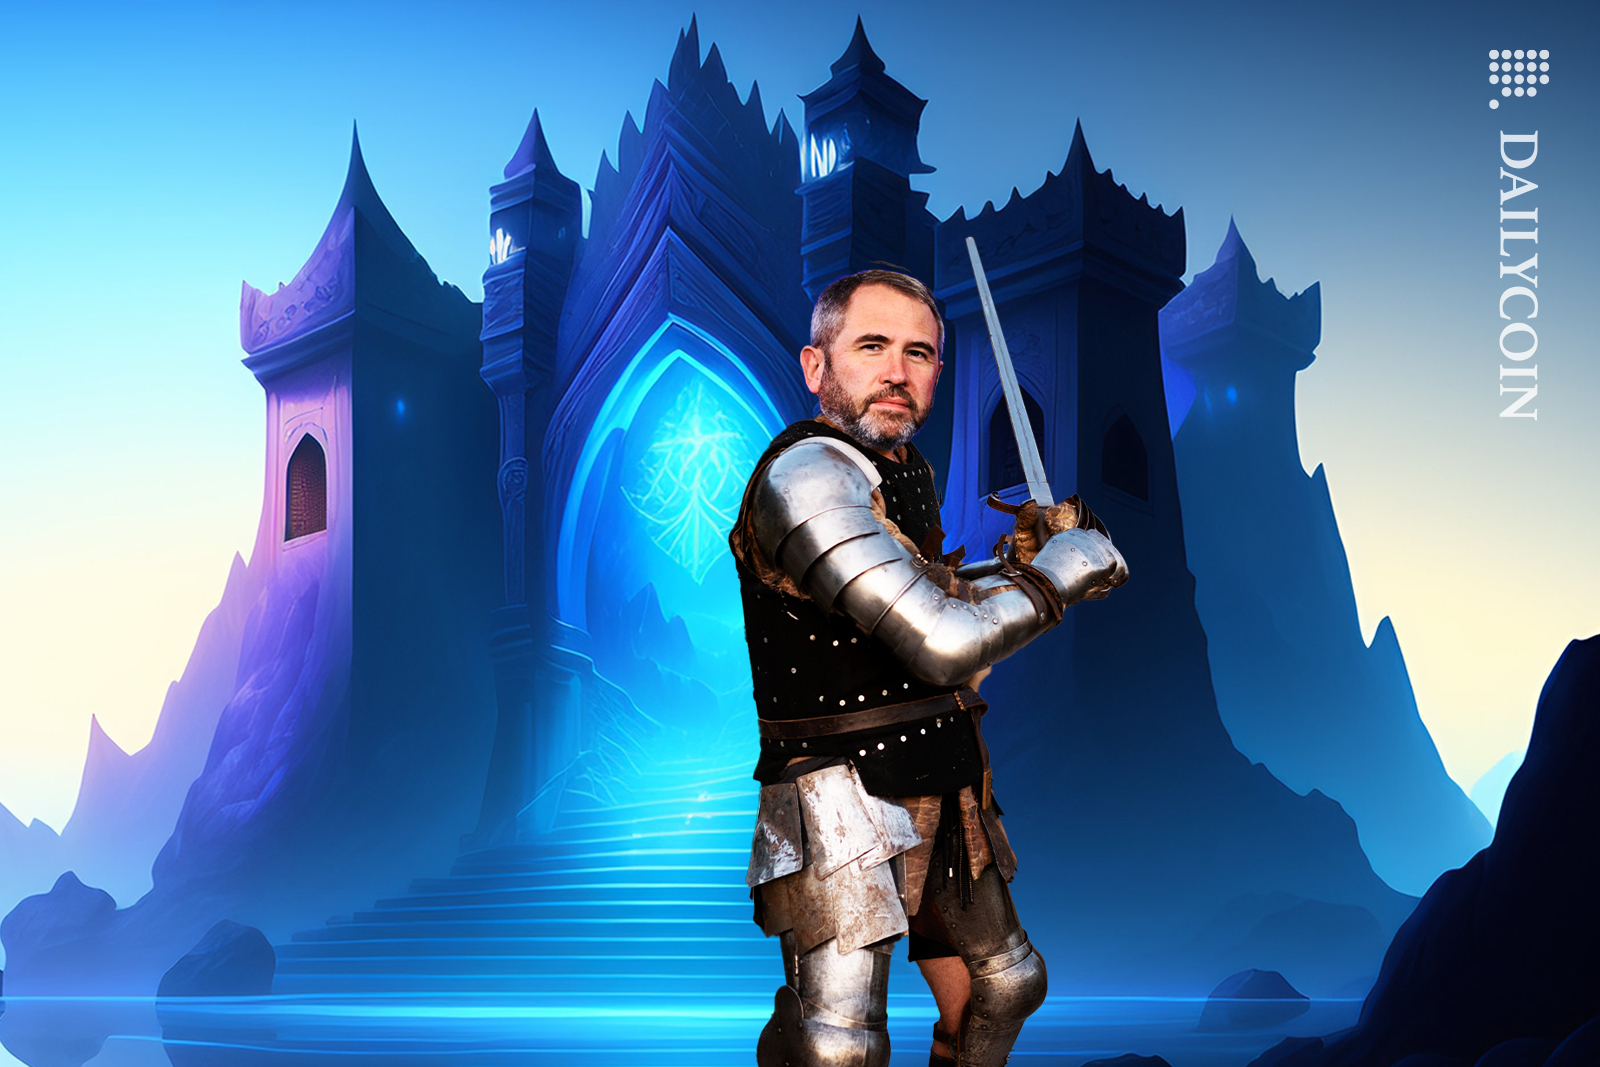 Brad Garlinhouse dressed as a knight with a fortress in the background.